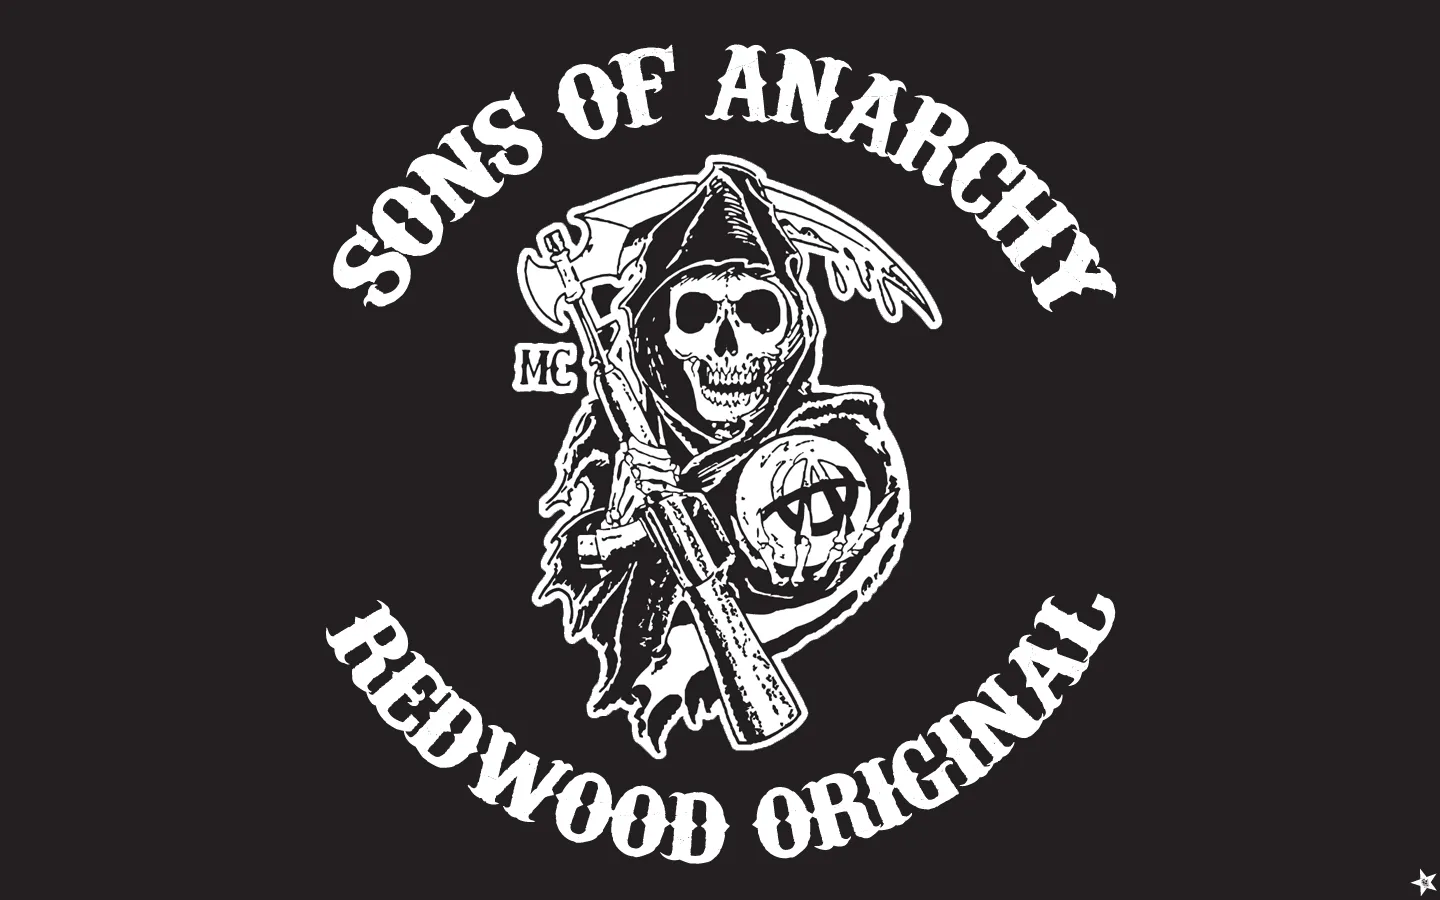 3x5 fts Son of Anarchy Chaos Flags wholesale factory price 90x150cm